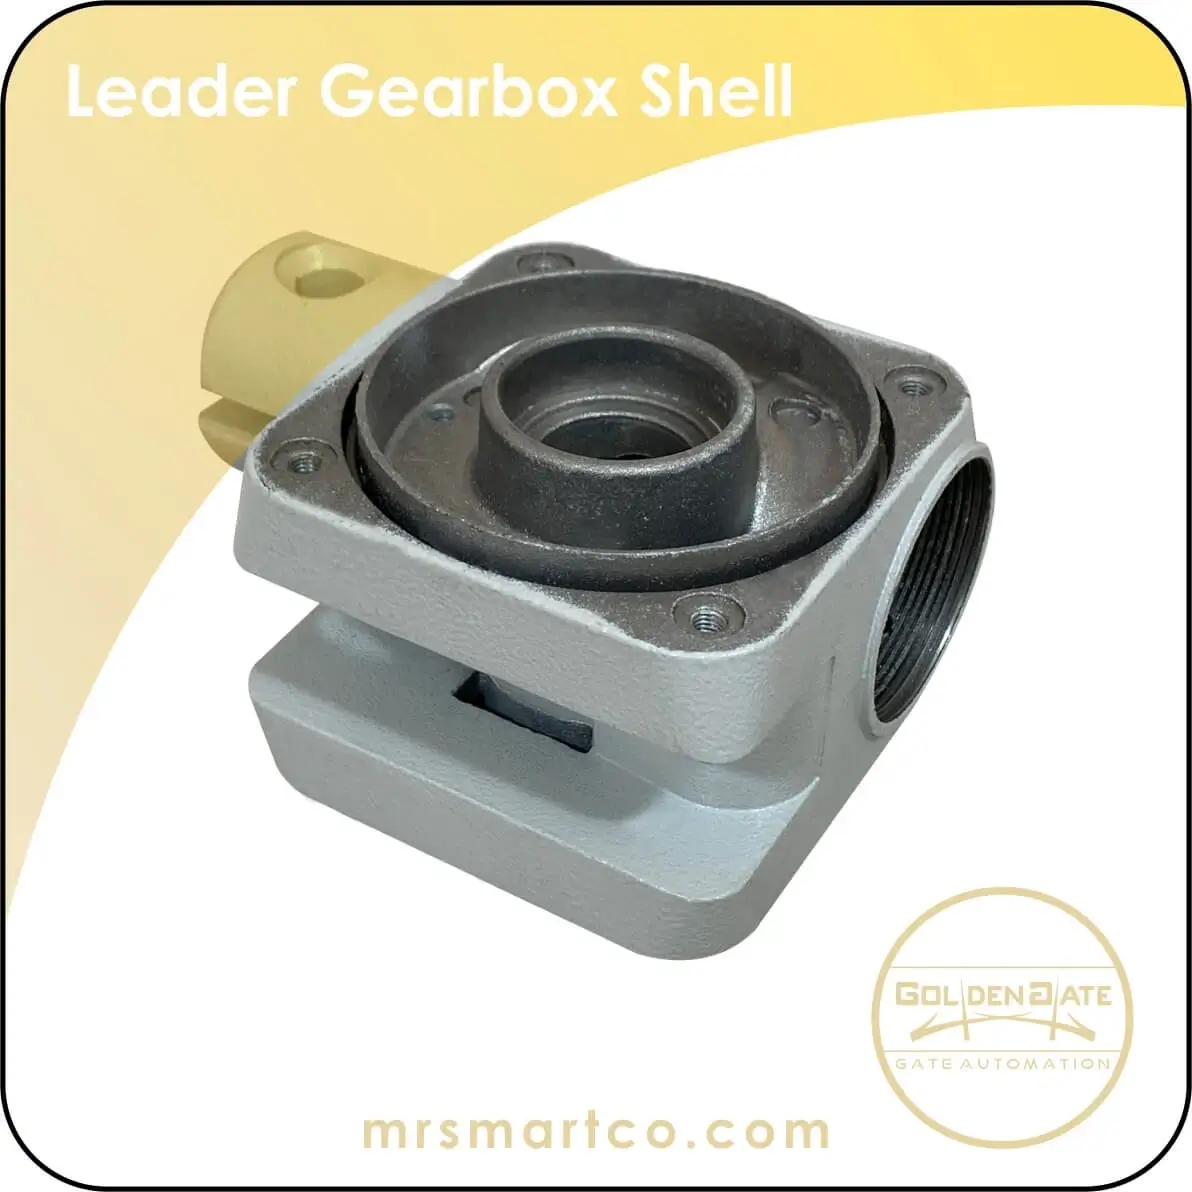 Leader Gearbox Shell